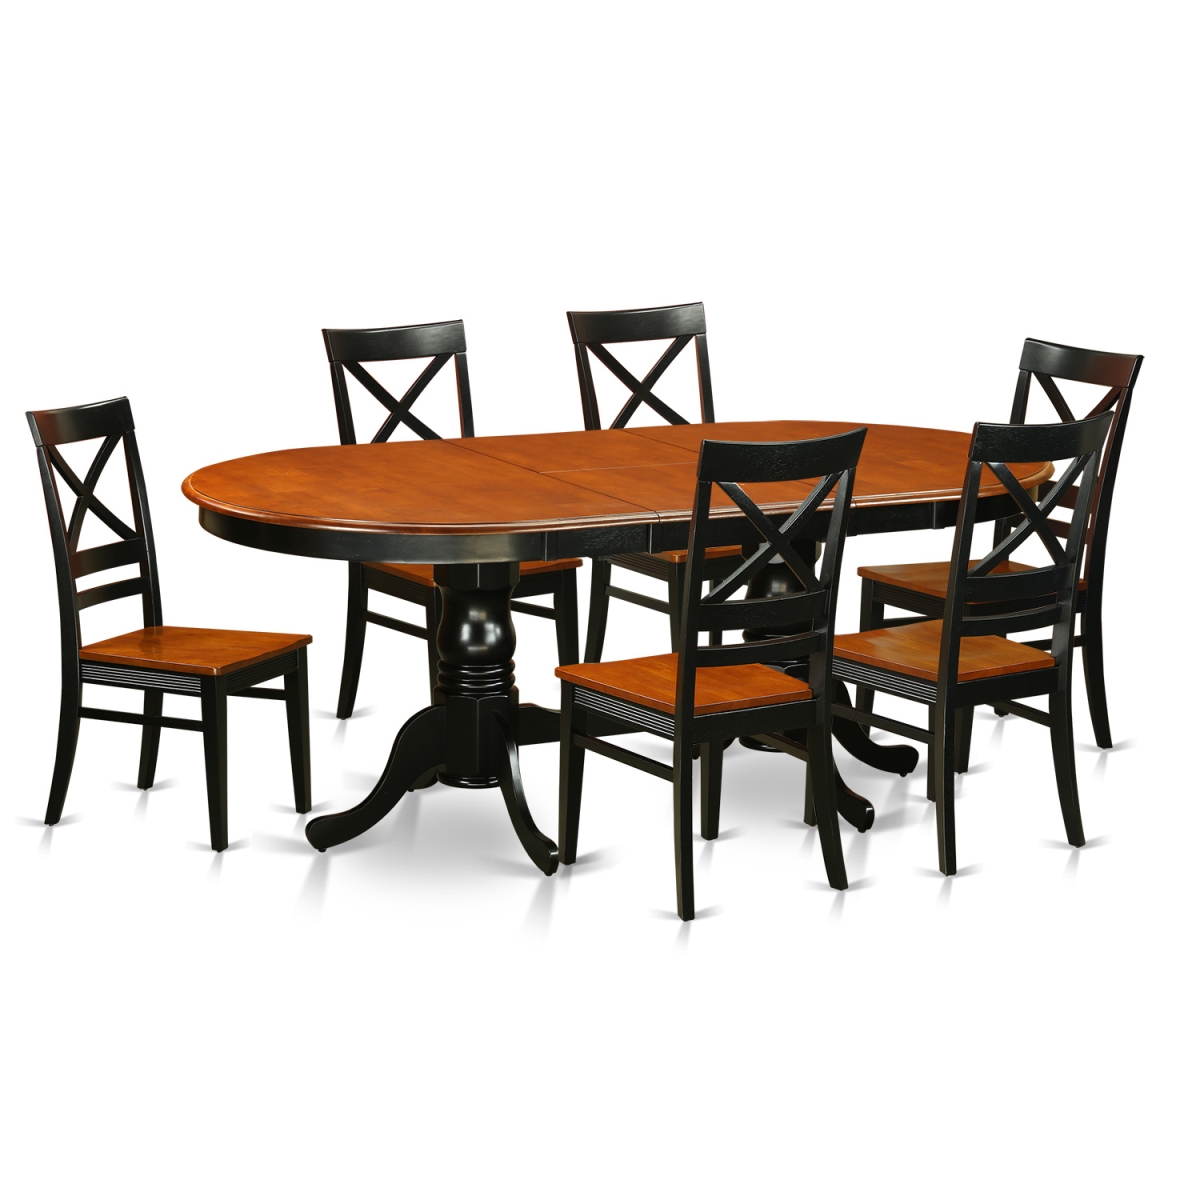 PLQU7-BCH-W Dining Set - Dining Table with 6 Solid Wood Chairs, Black & Cherry - 7 Piece -  East West Furniture